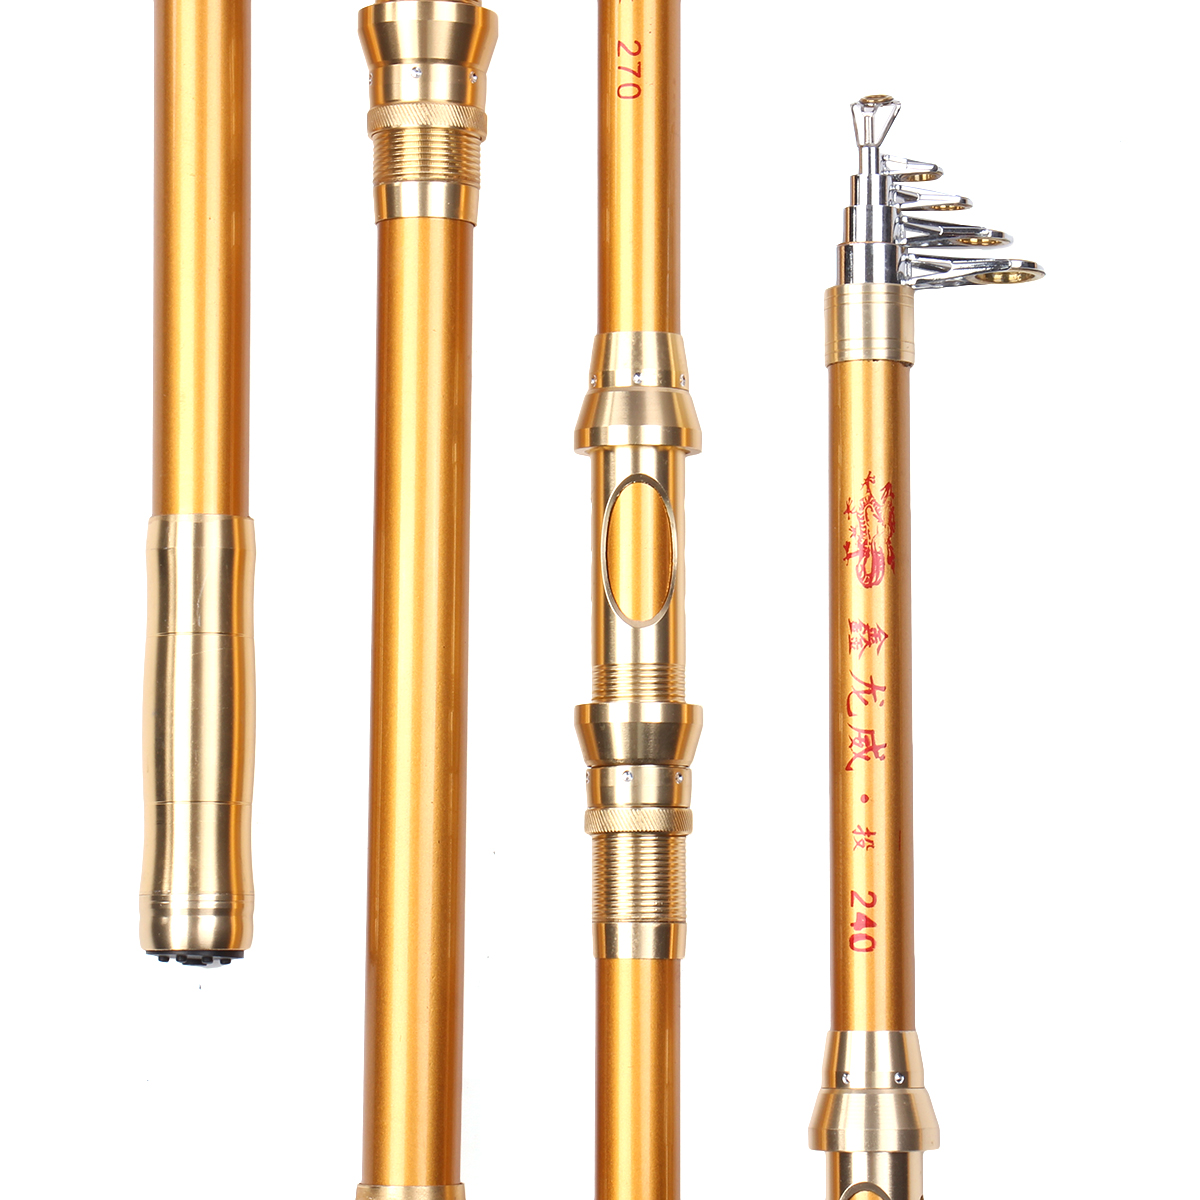 2124273036M-Telescopic-Fishing-Rod-Ultra-light-and-Sturdy-Long-distance-Casting-Rod-Outdoor-Fishing--1889795-14